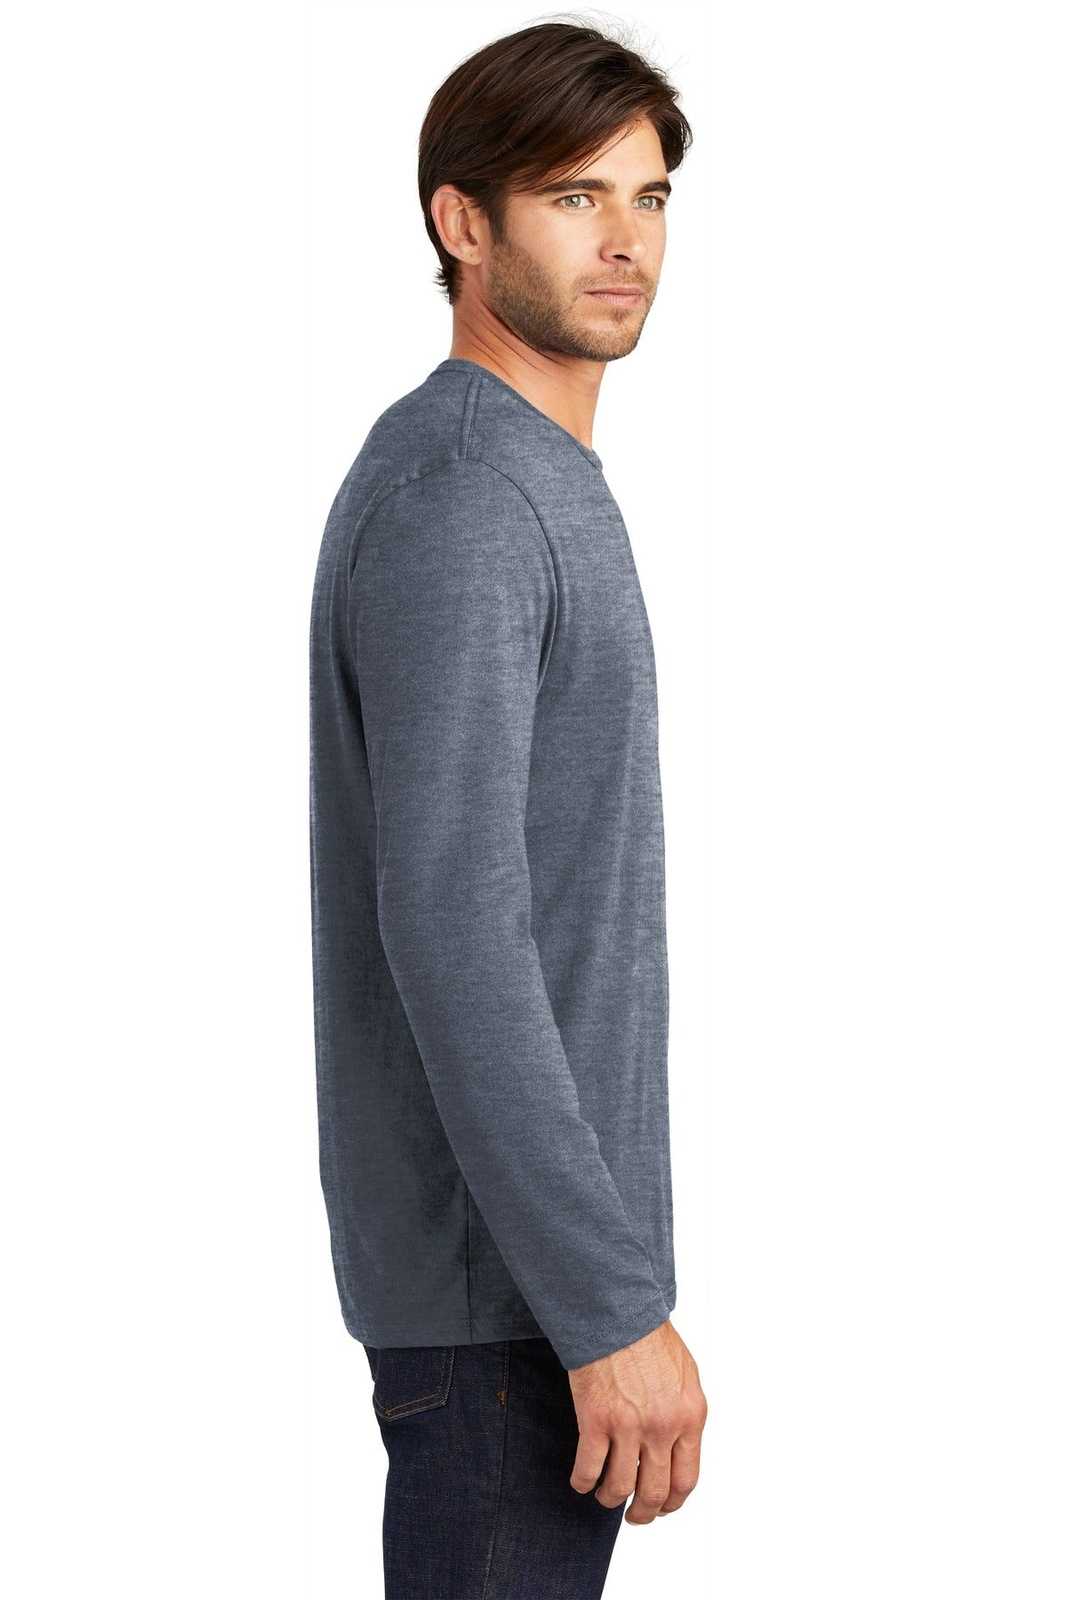 District DT105 Perfect Weight Long Sleeve Tee - Heathered Navy - HIT a Double - 3